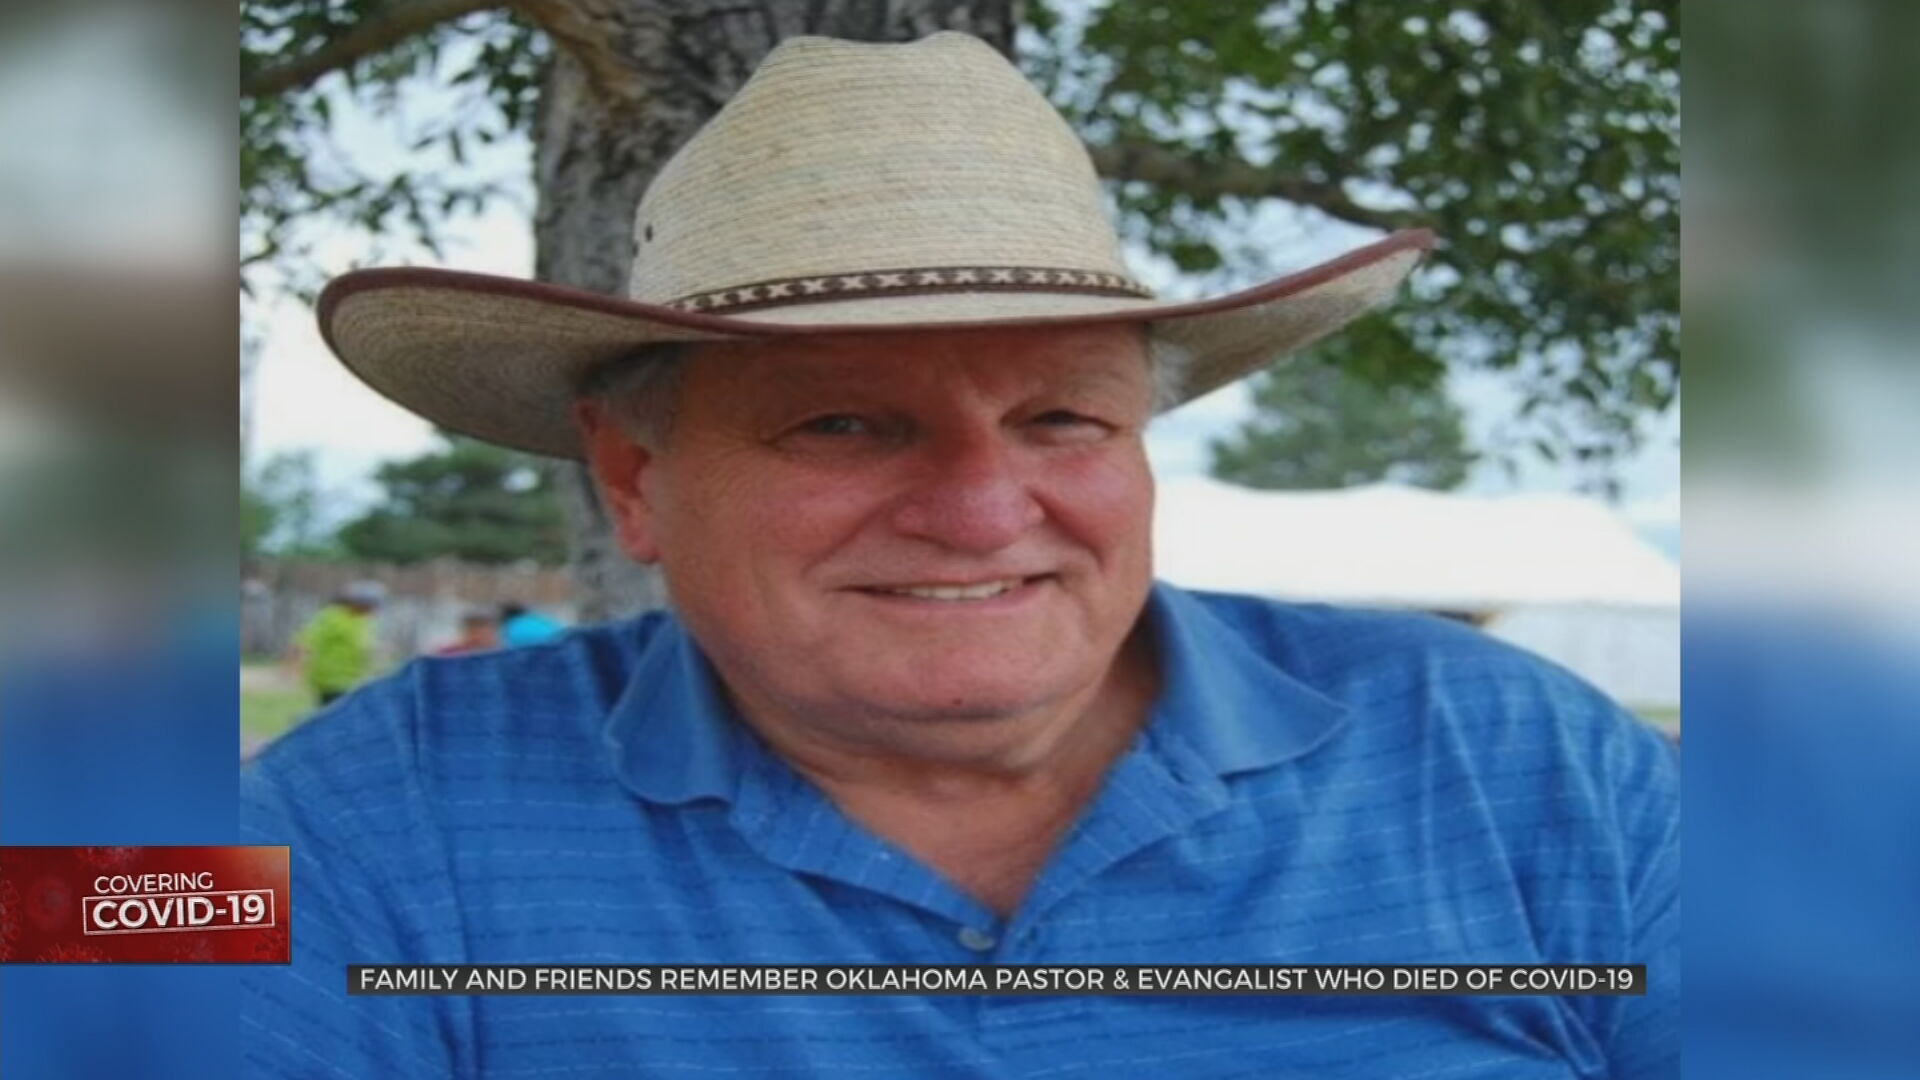 Community Mourns Loss Of Longtime Oklahoma Evangelist To COVID-19 Complications